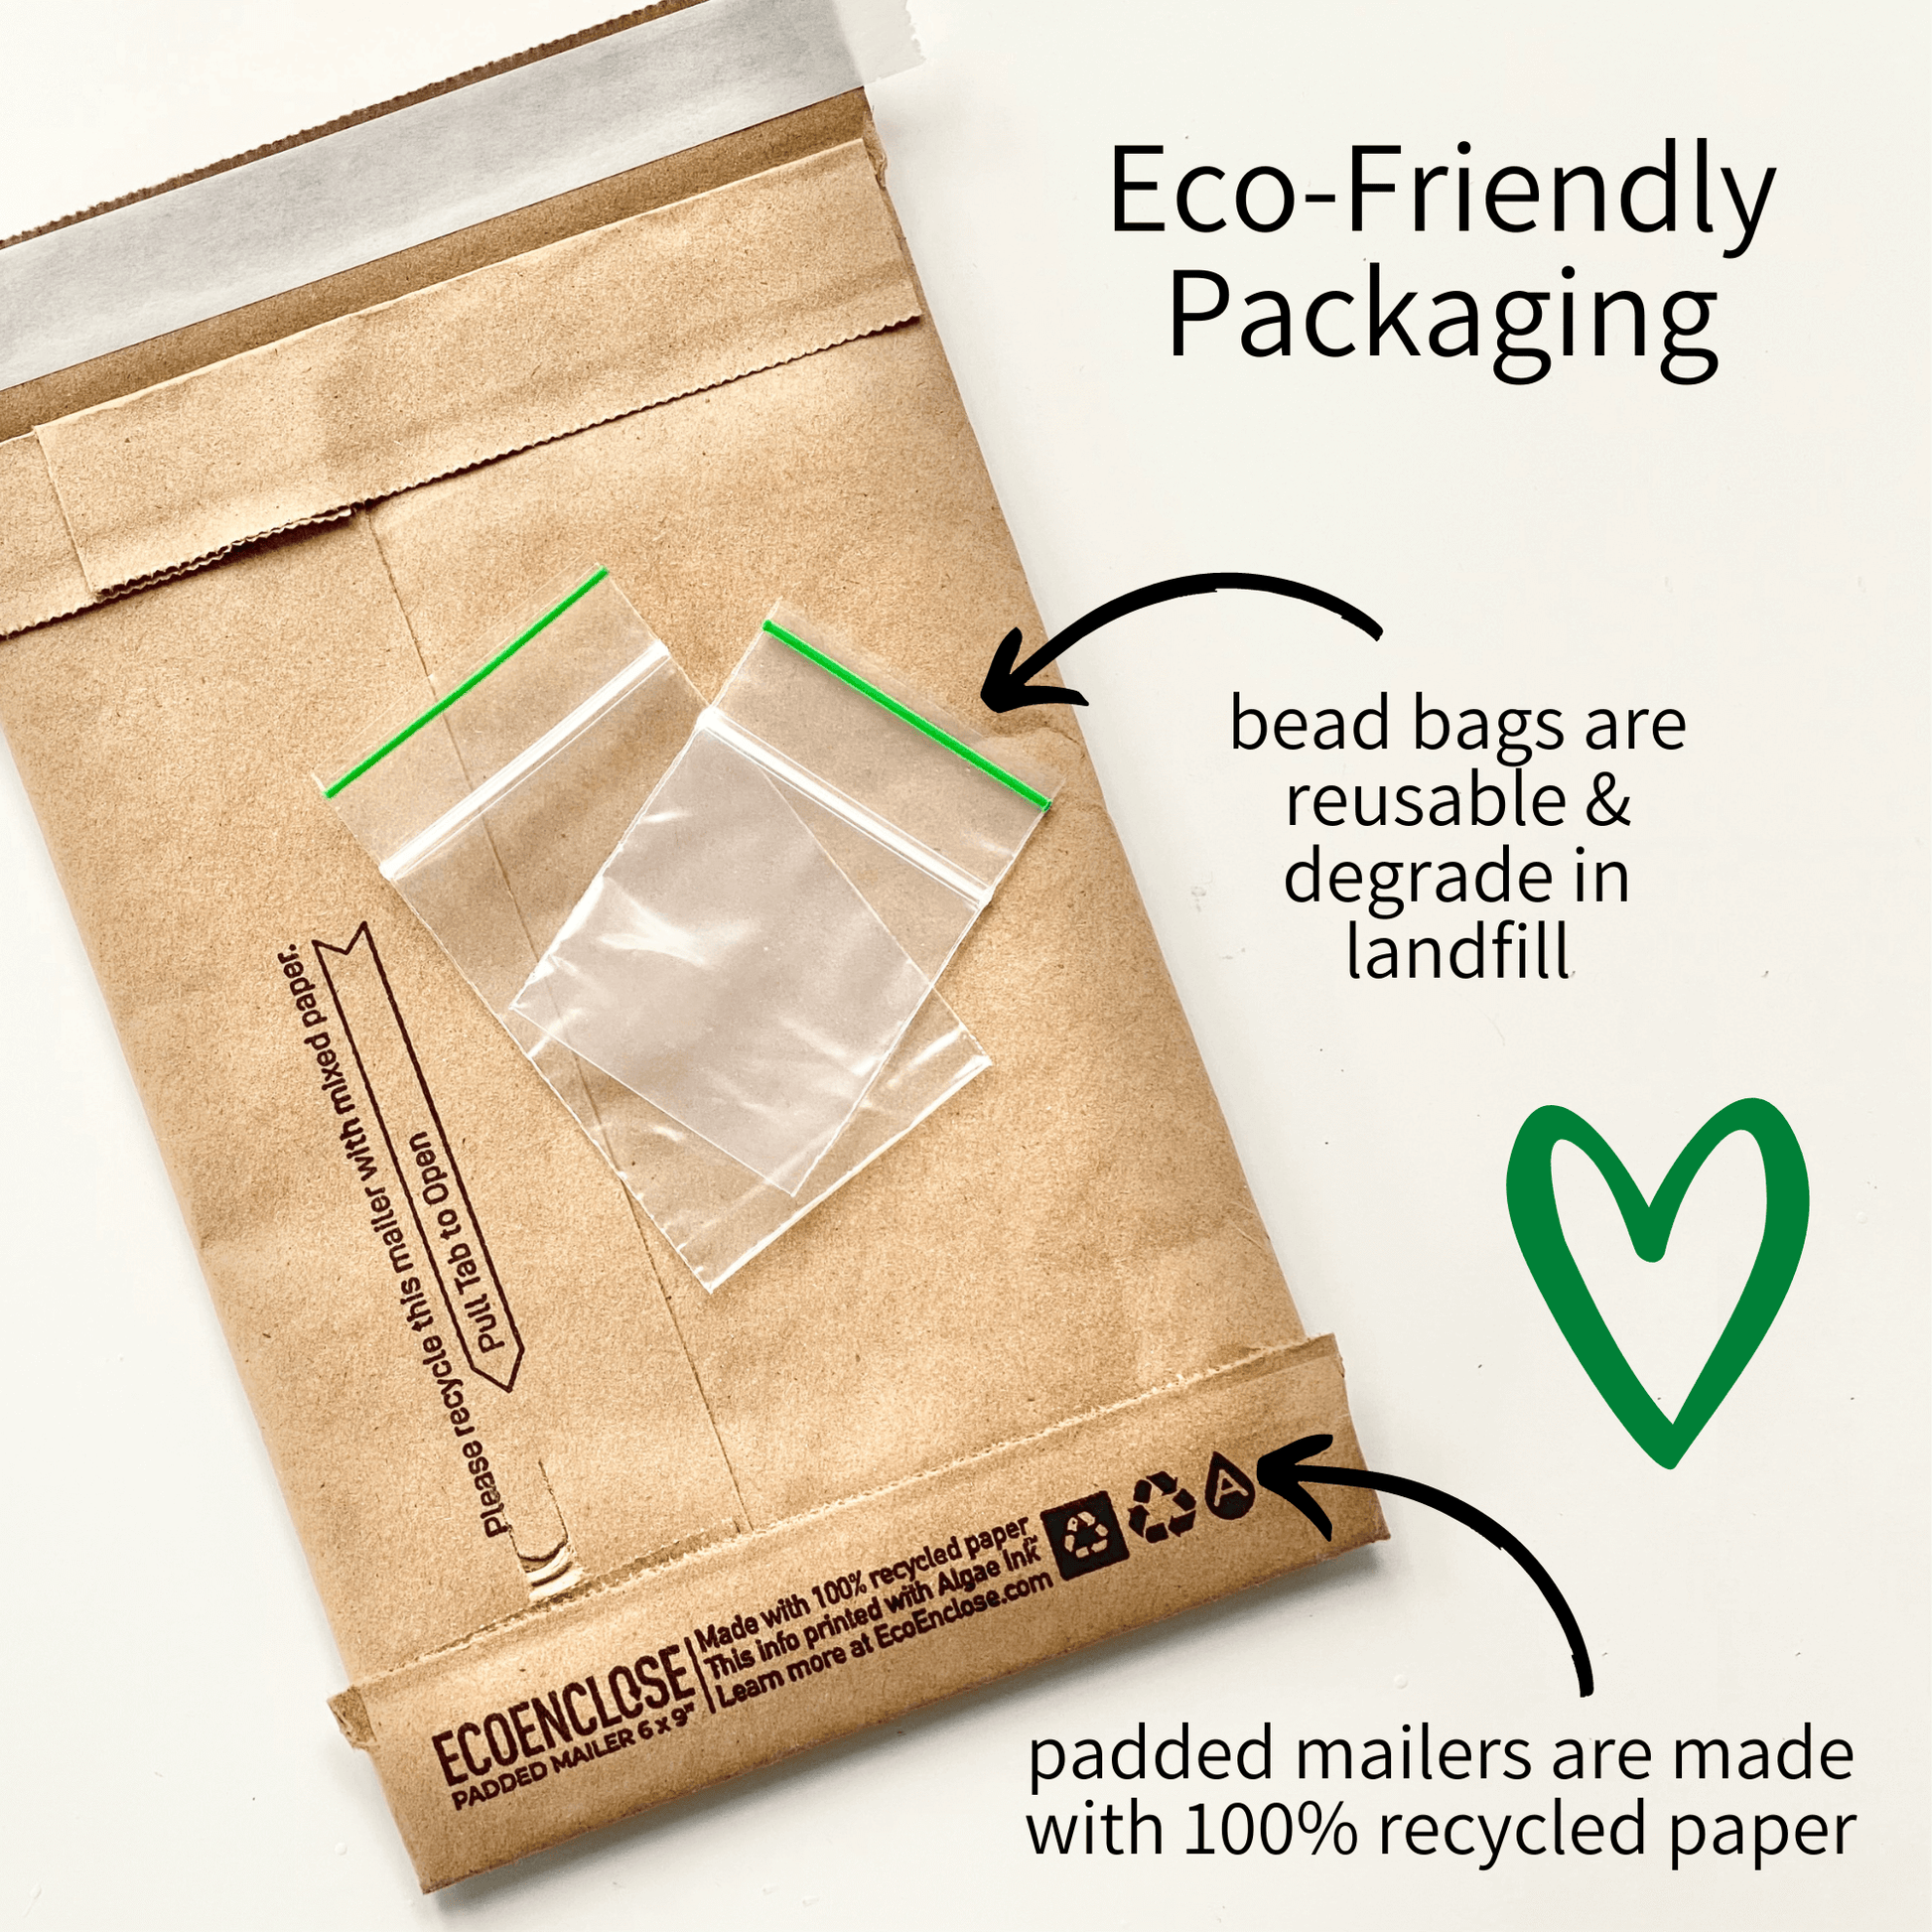 Eco-friendly packaging used by The Bead Mix, including degradable plastic bags and a recycled paper mailer